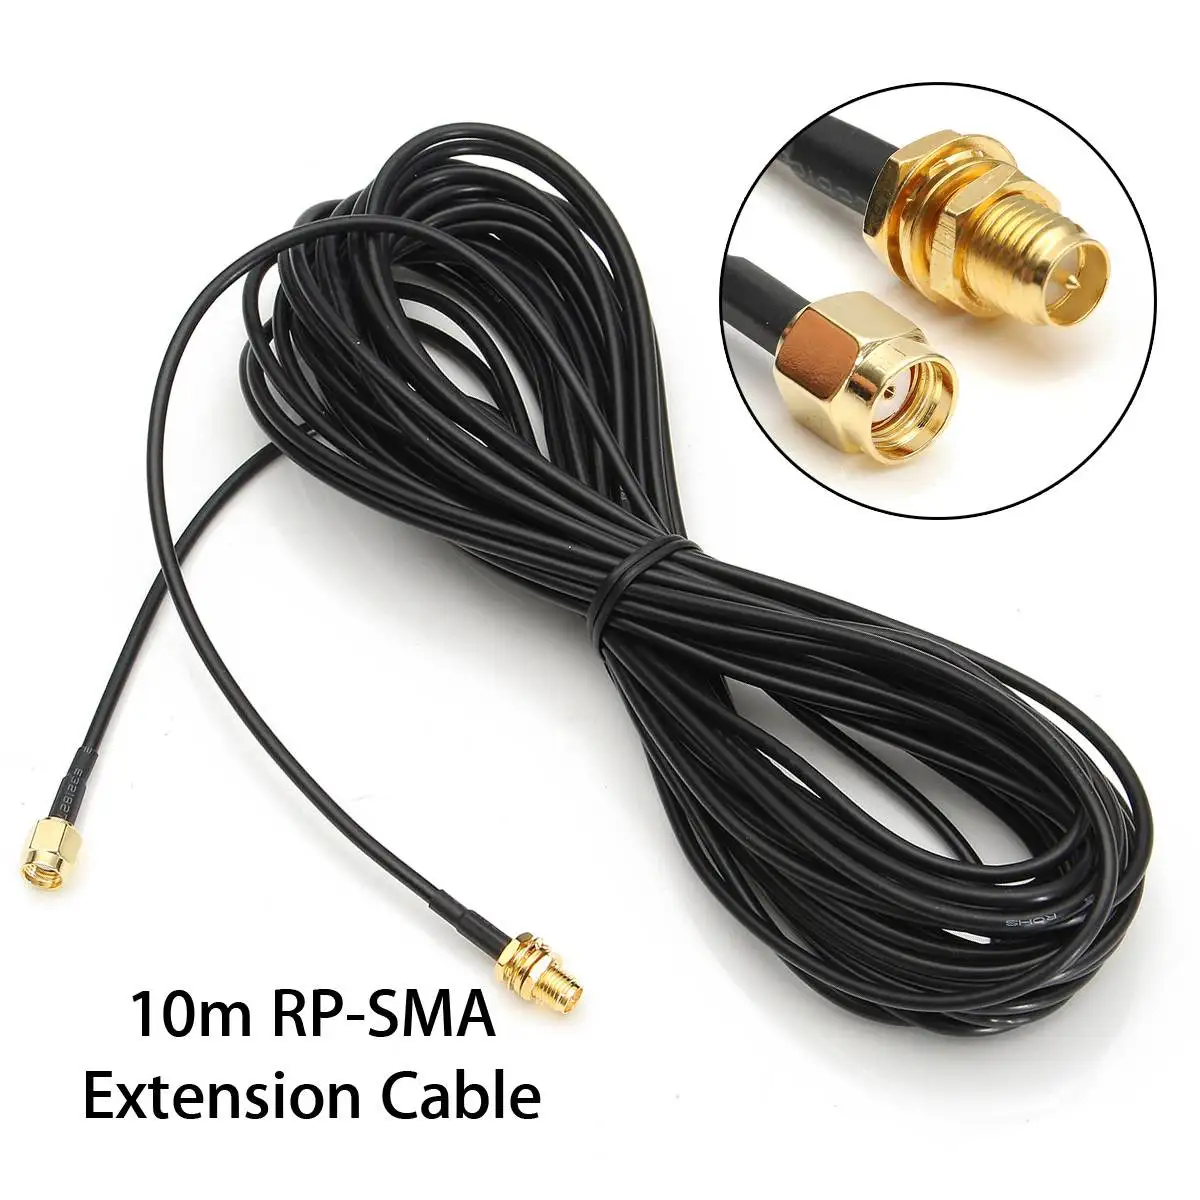 RP-SMA Antenna Connector Extension Cable Cord Line For WiFi Wireless Router 10M 